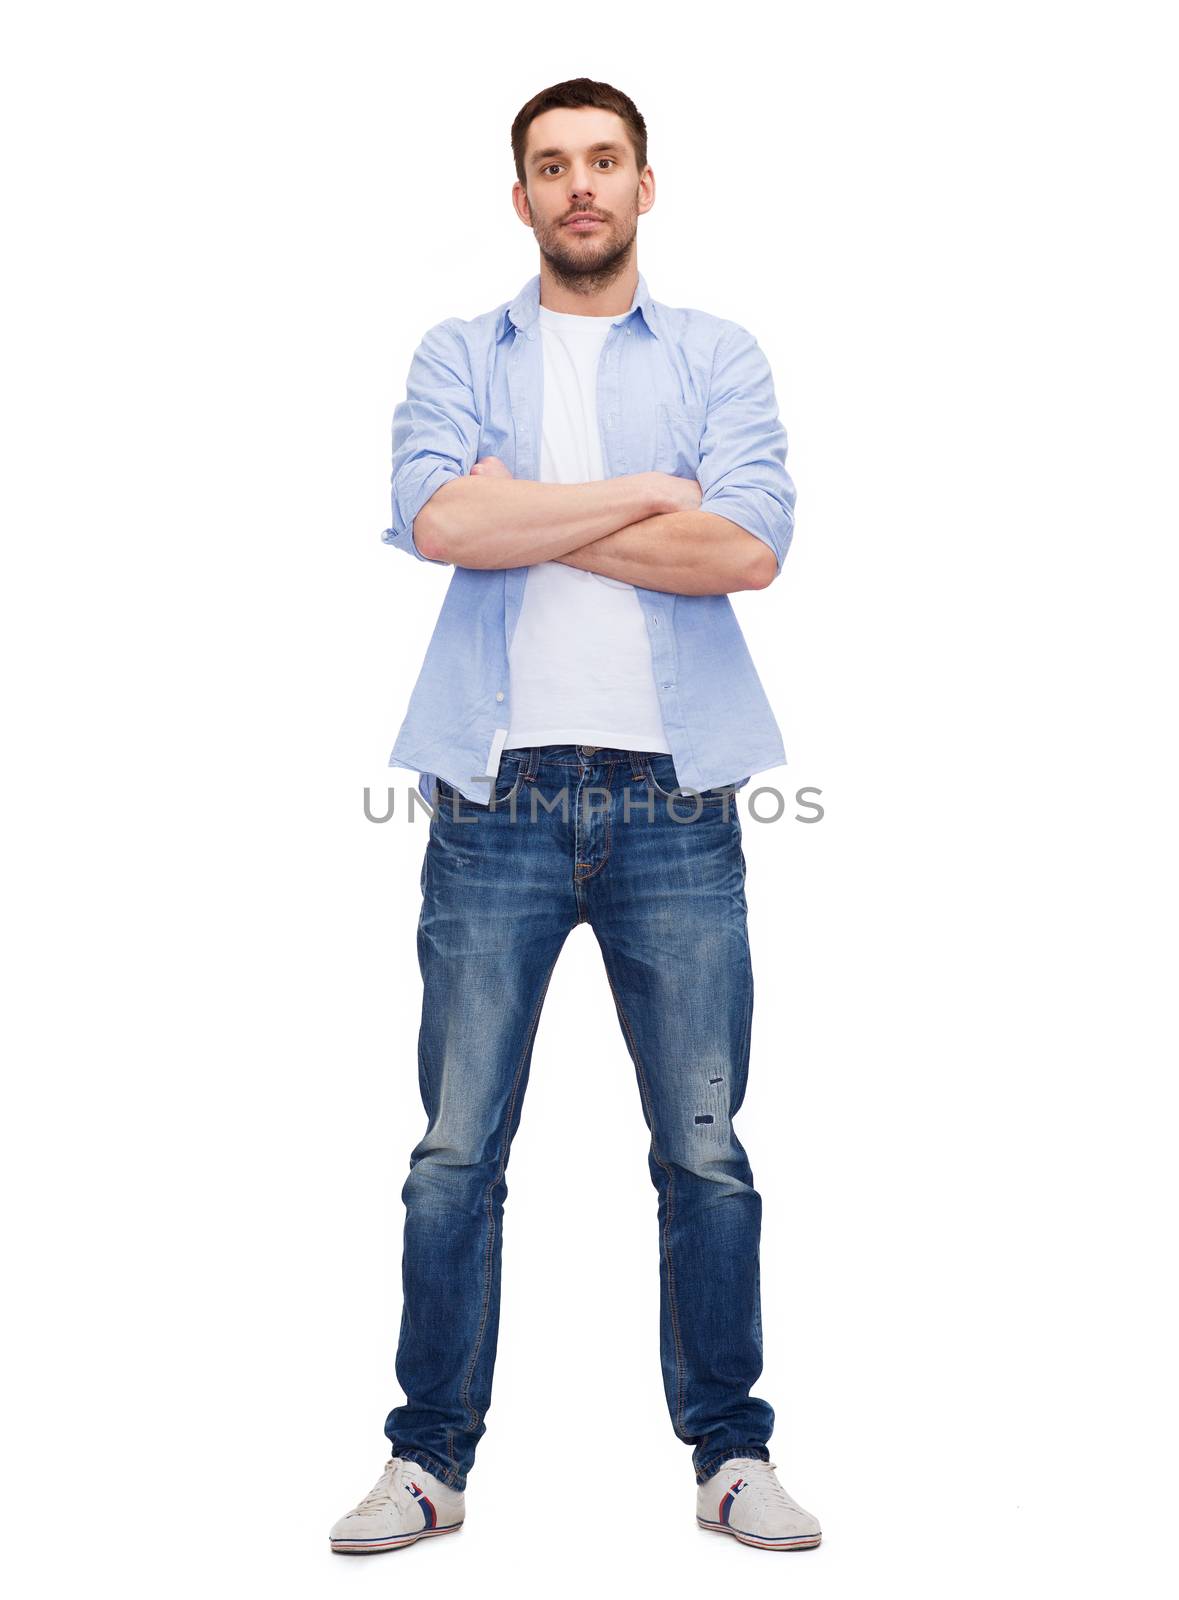 happiness and people concept - calm man with crossed arms